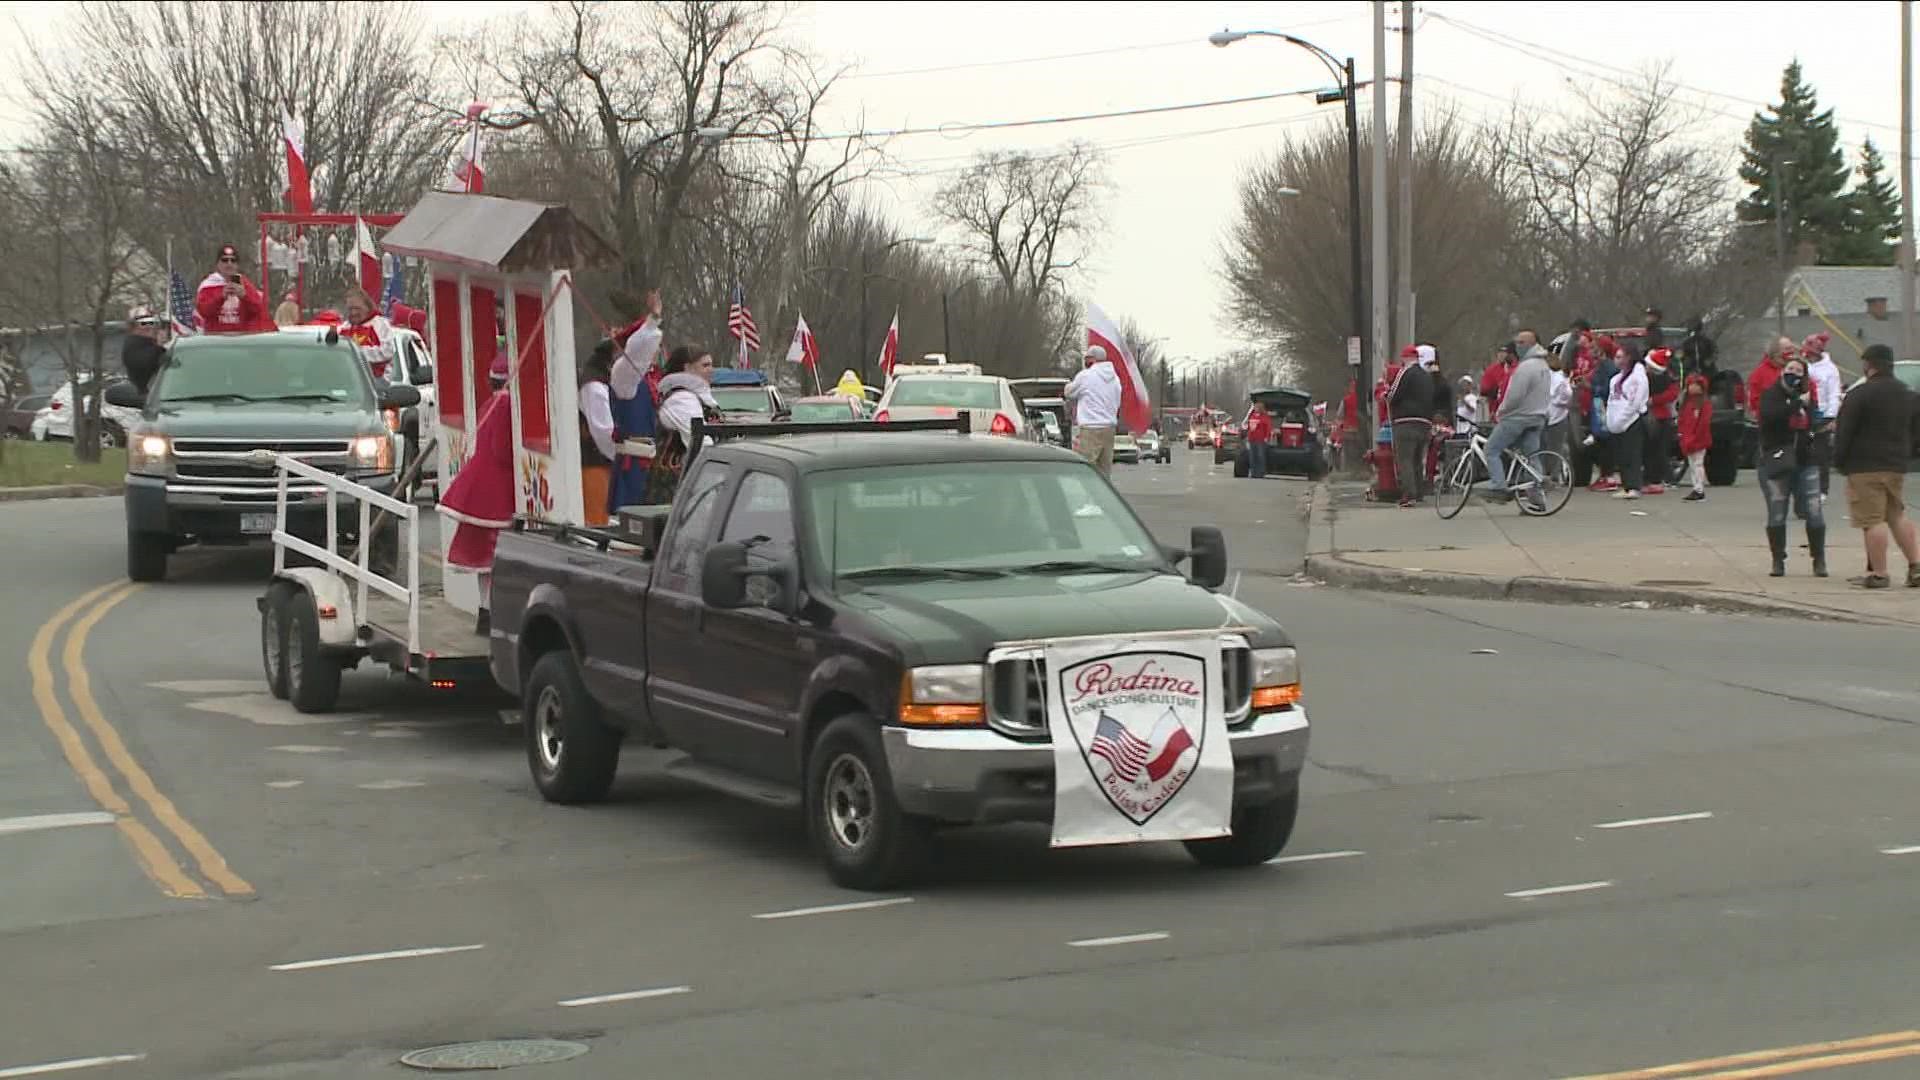 Dyngus Day may still be a little over three weeks away, but organizers are getting ready for the next big Buffalo celebration.